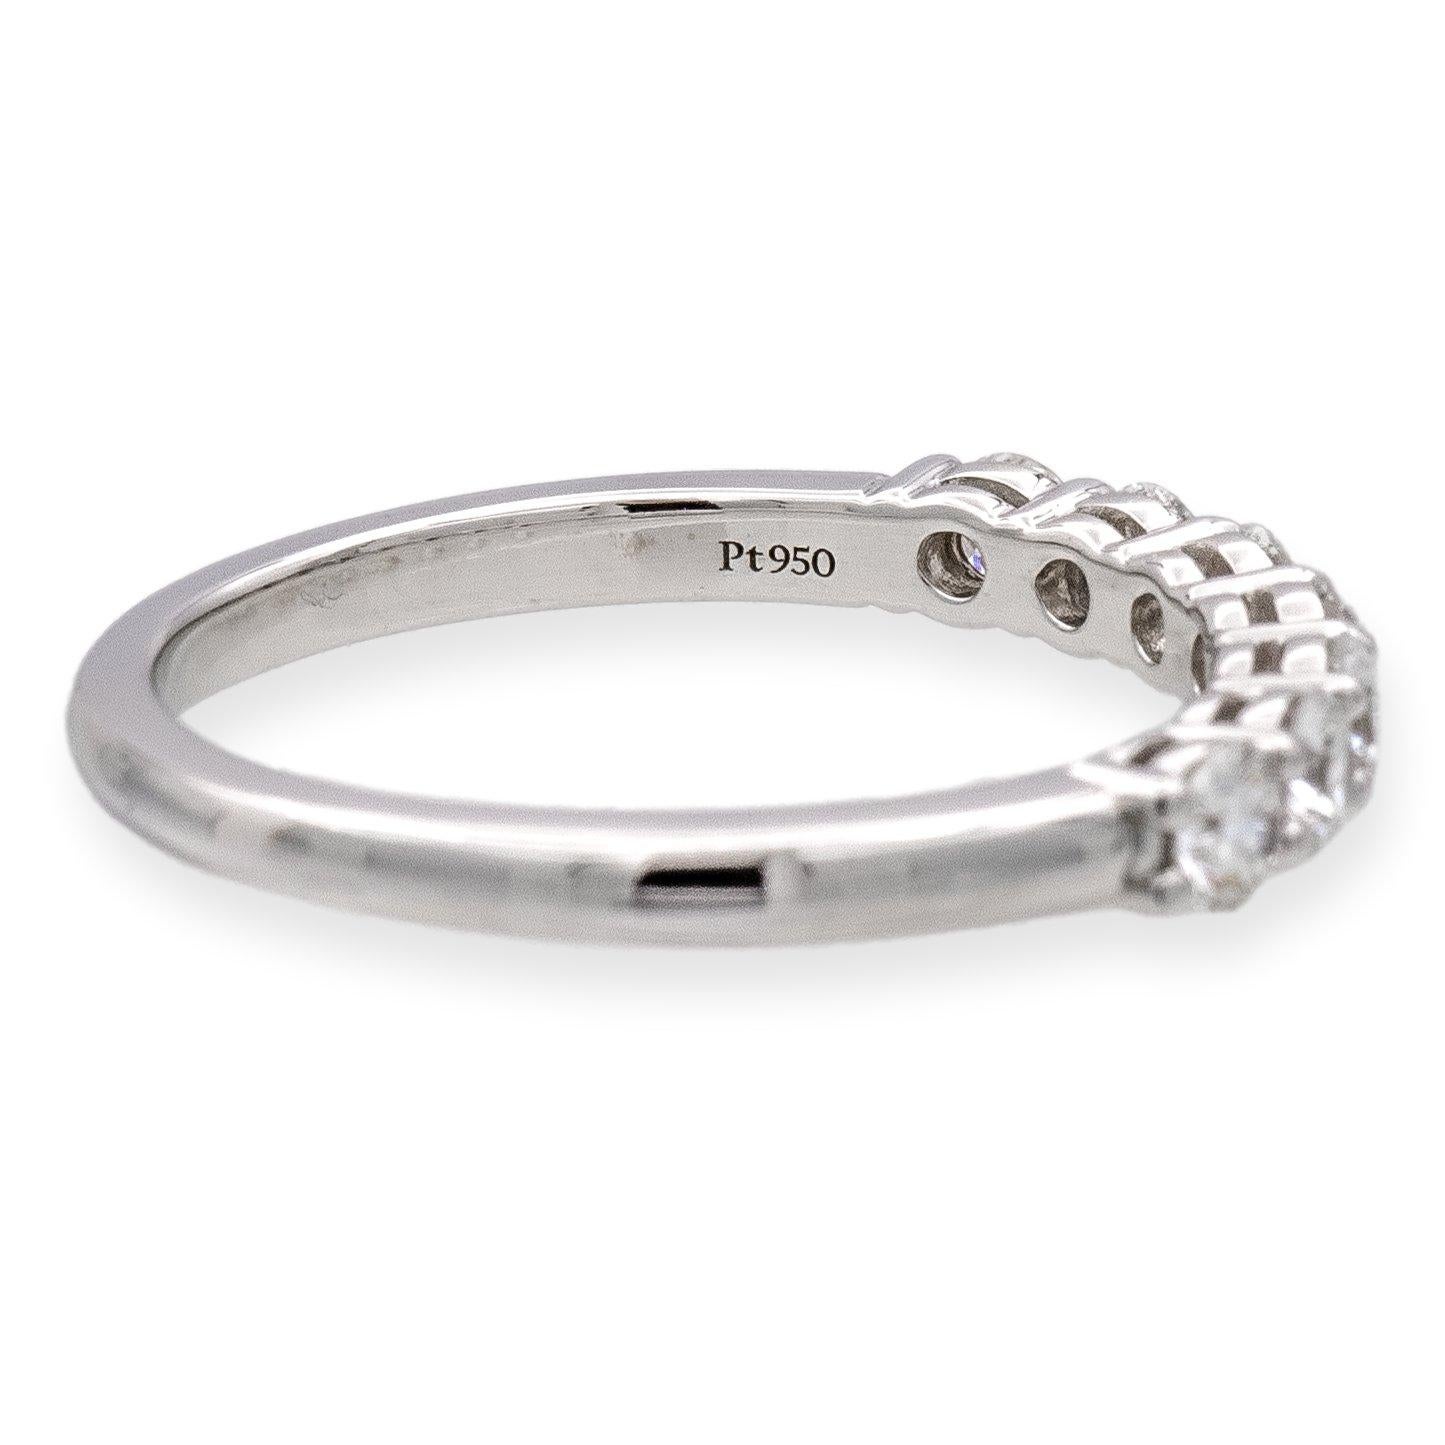 Tiffany & Co. Forever Half Band ring finely crafted in platinum featuring 7 Round Brilliant cut diamonds set in shared prongs weighing .57 carats total weight. Very bright E-F color , VVS2-VS clarity. The diamonds have excellent brilliance and fire.